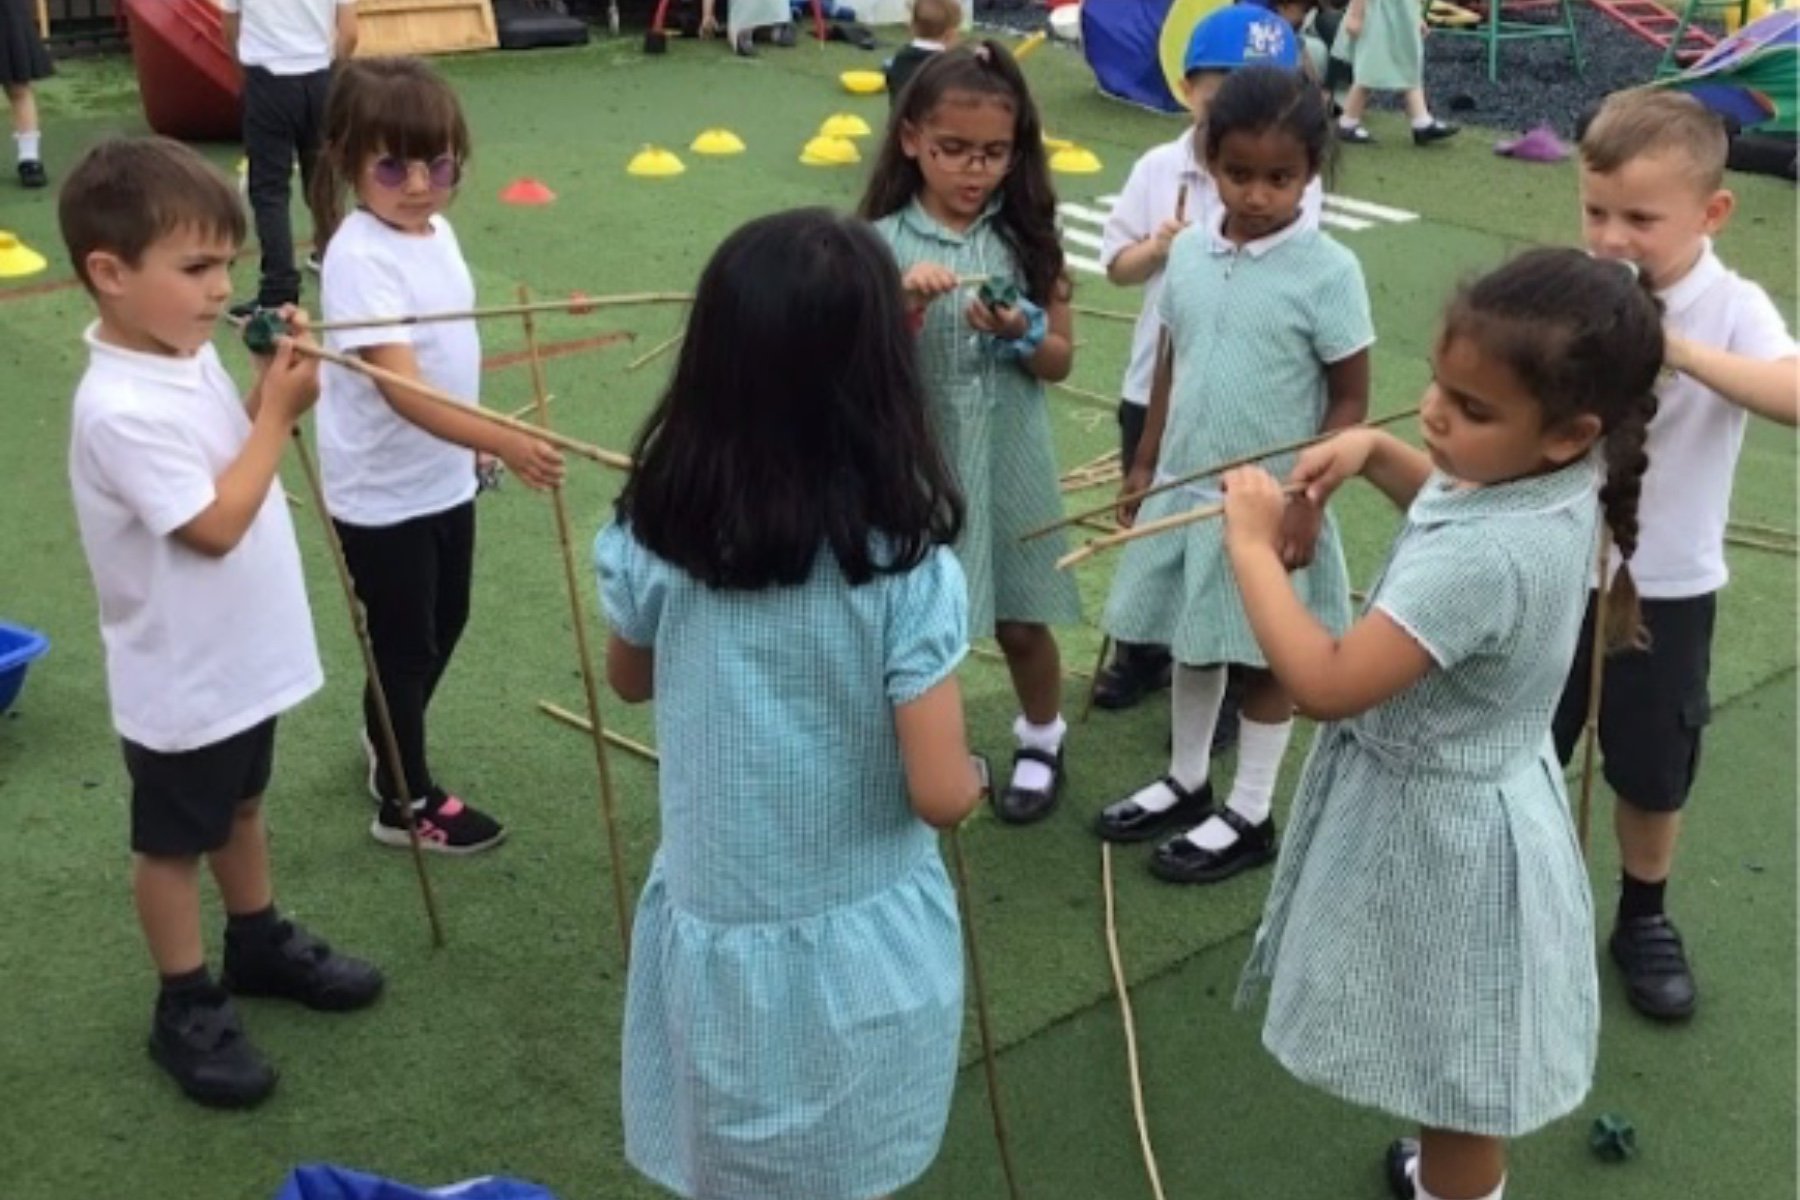 Children playing at Houghton Regis Primary